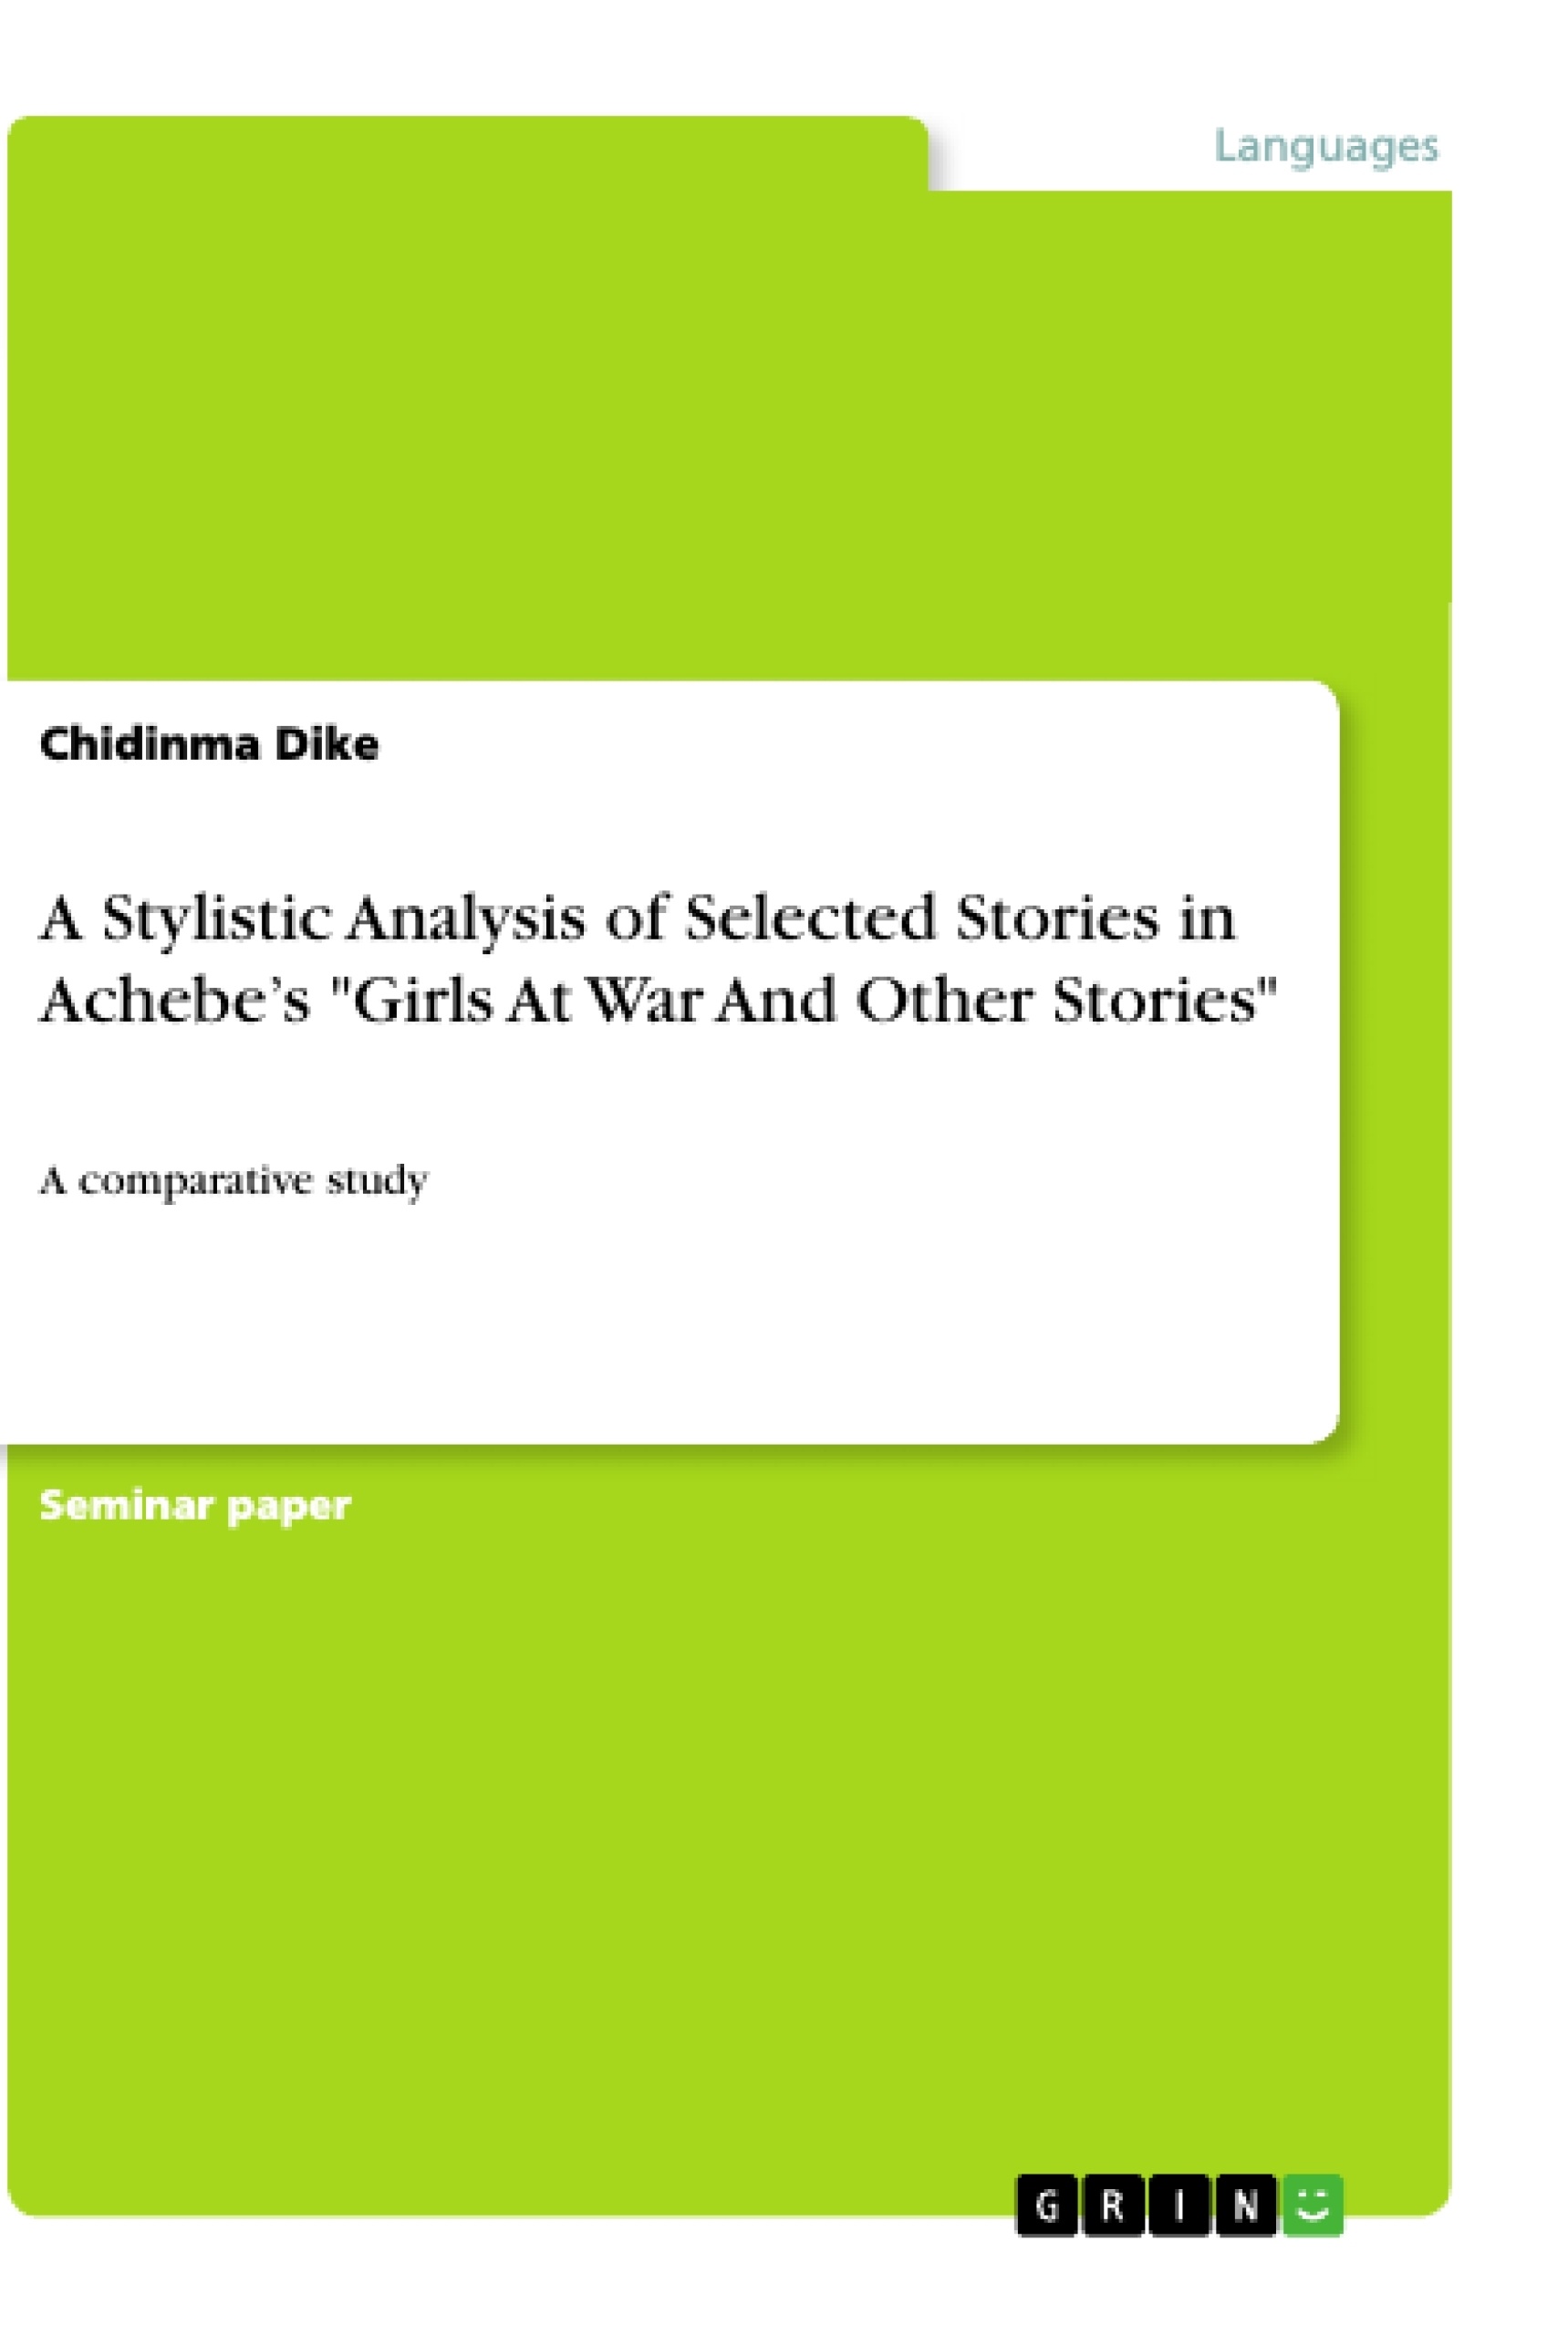 Title: A Stylistic Analysis of Selected Stories in Achebe’s "Girls At War And Other Stories"